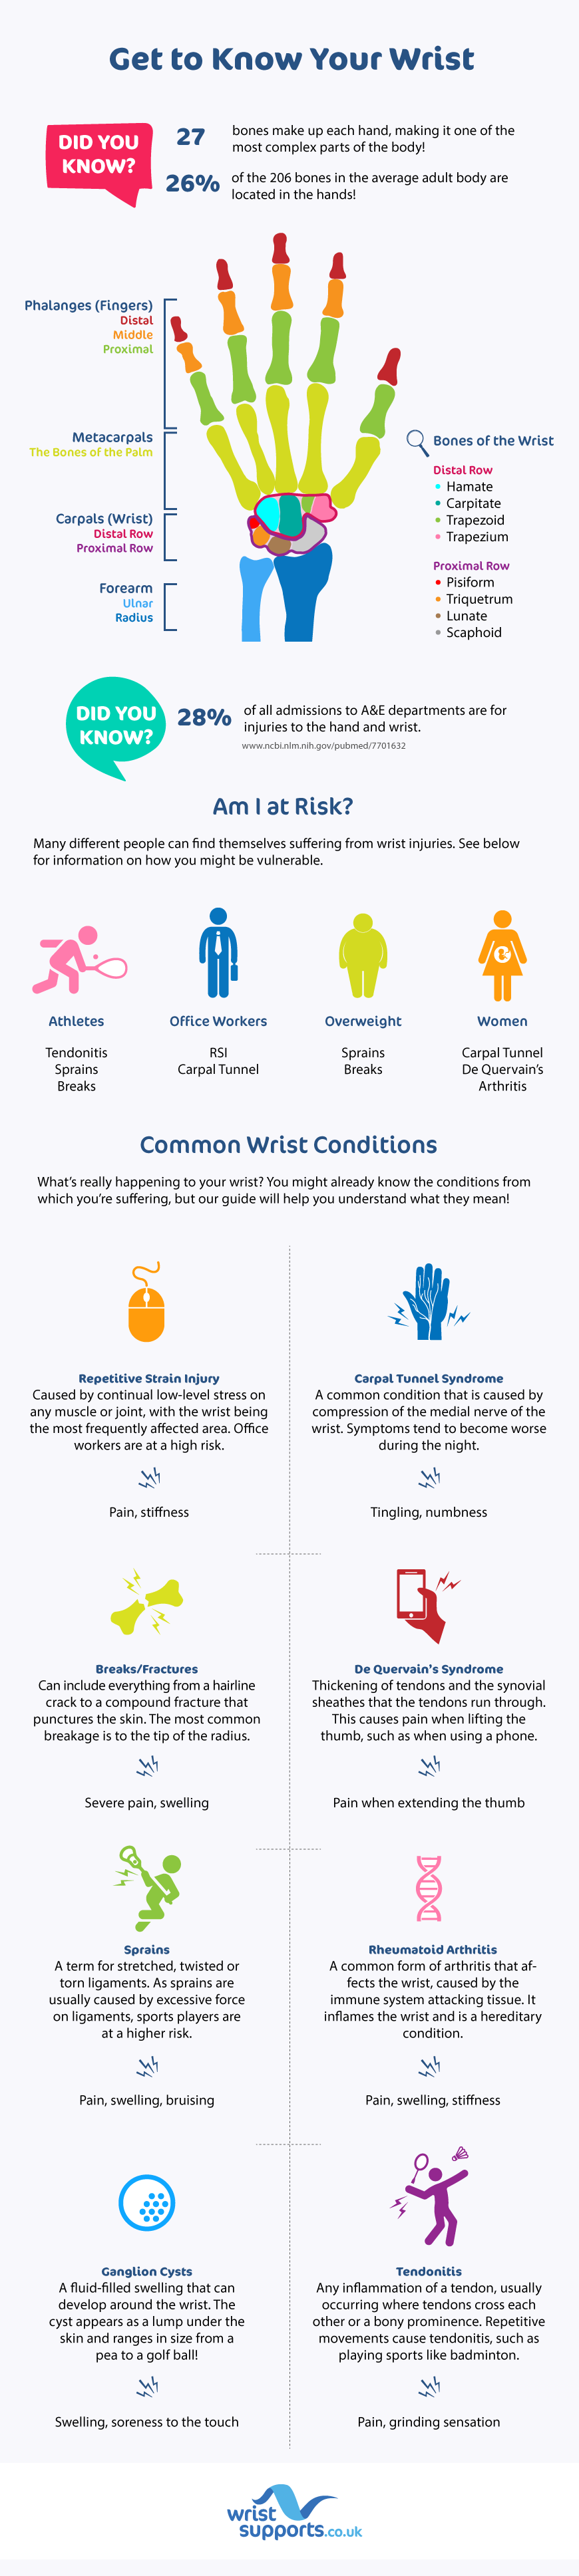 Get to Know Your Wrist